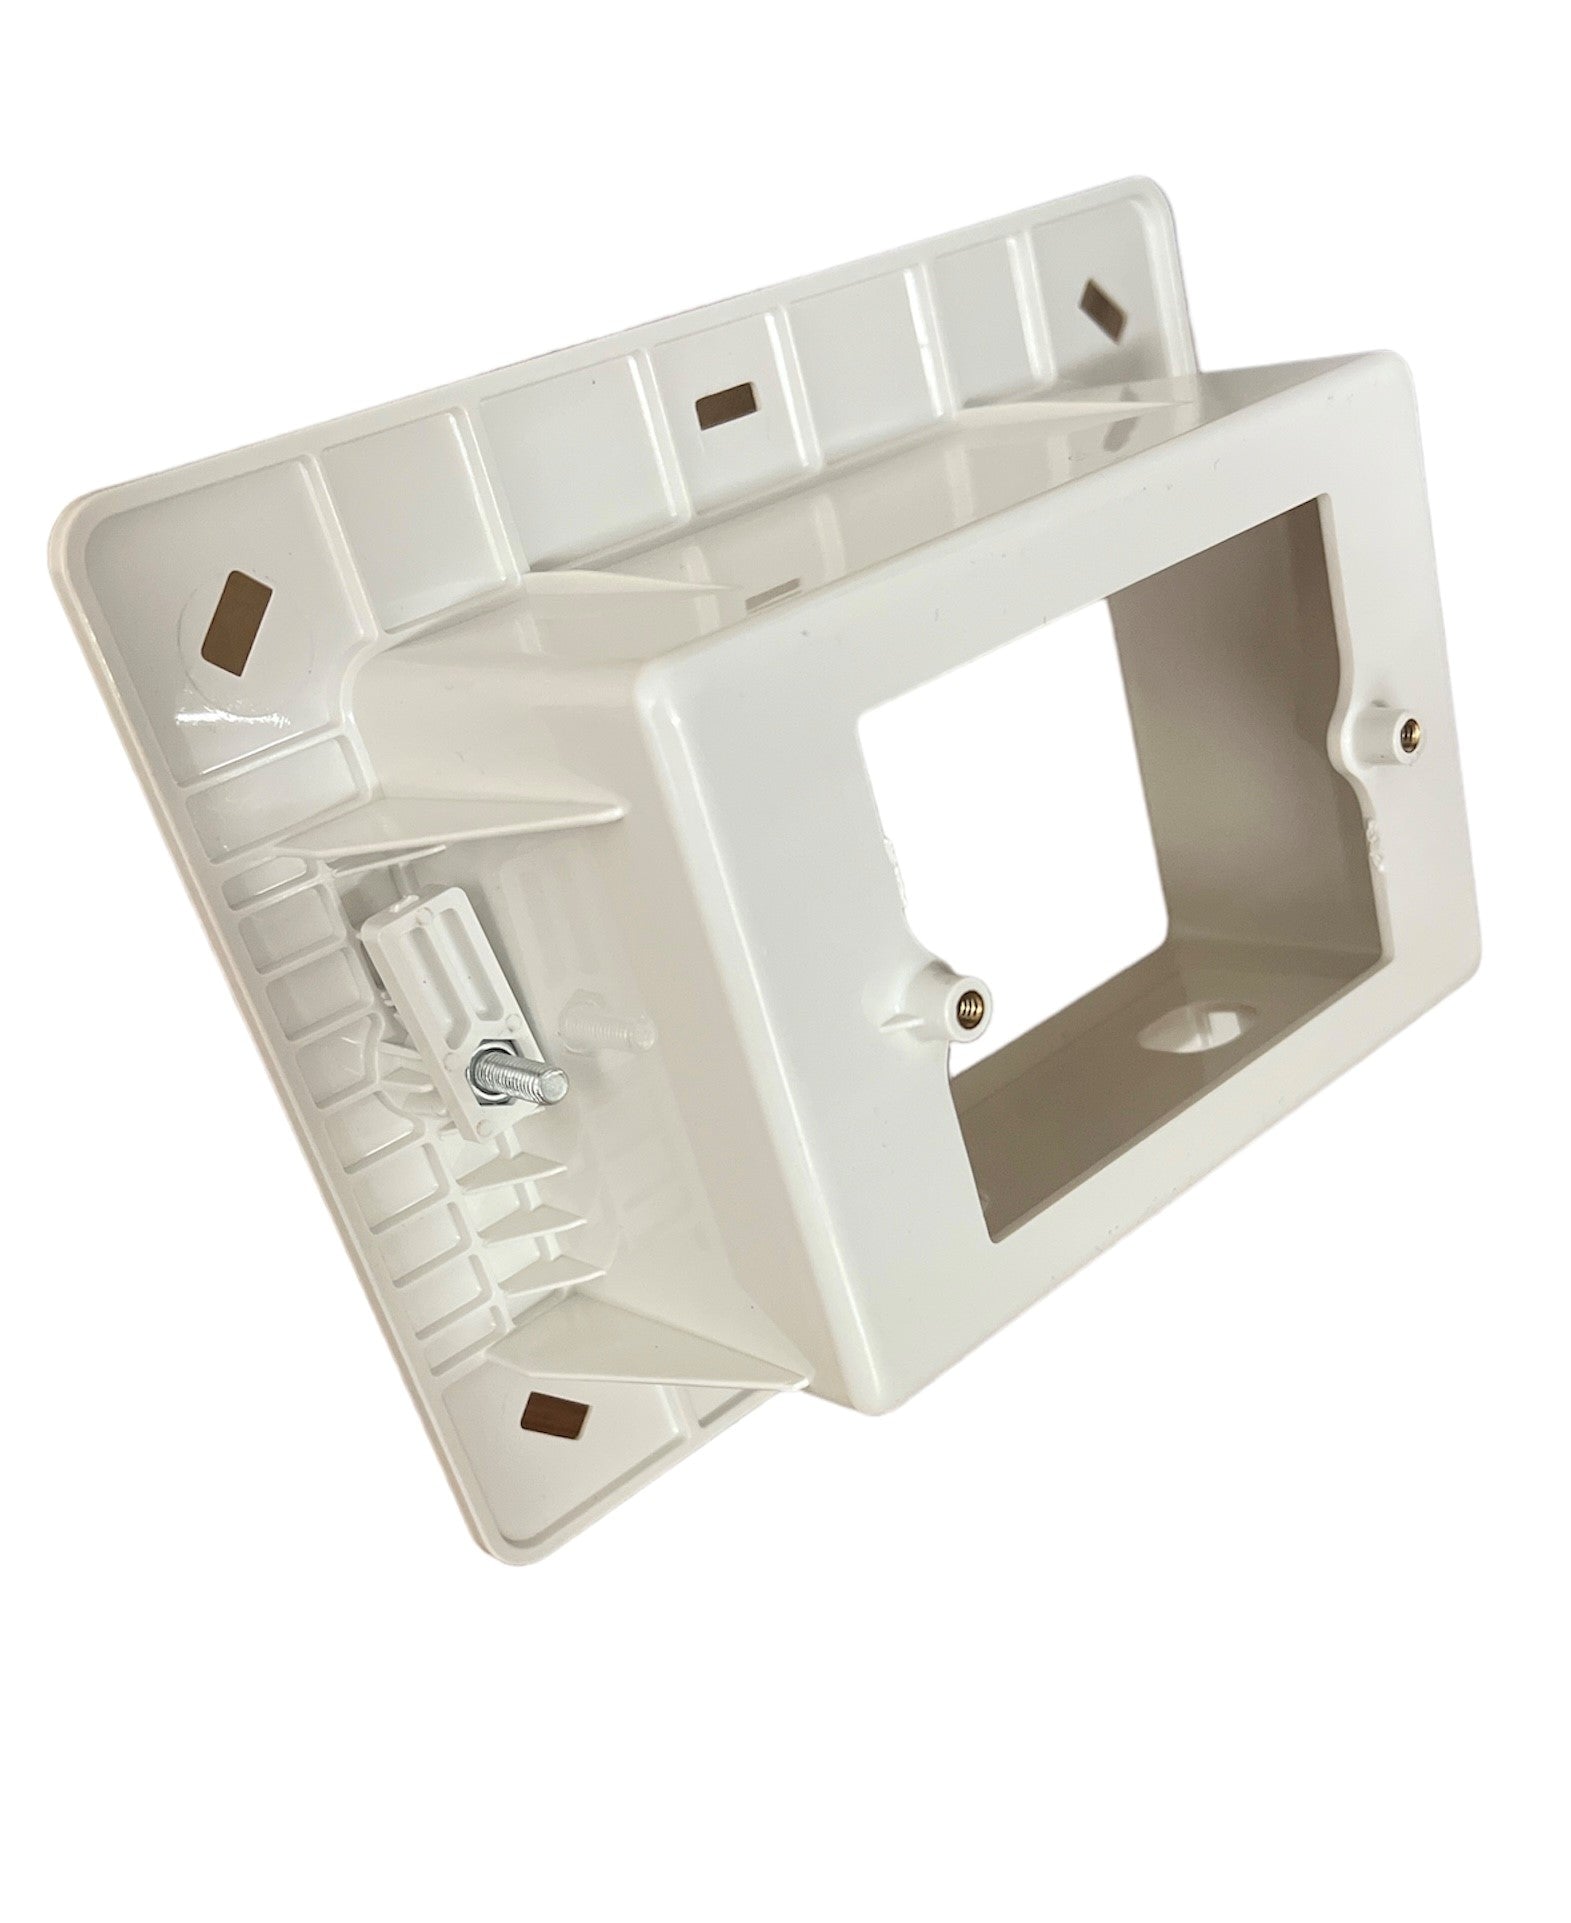 Recessed Wall Plate Box and 2 Punch Out Ports